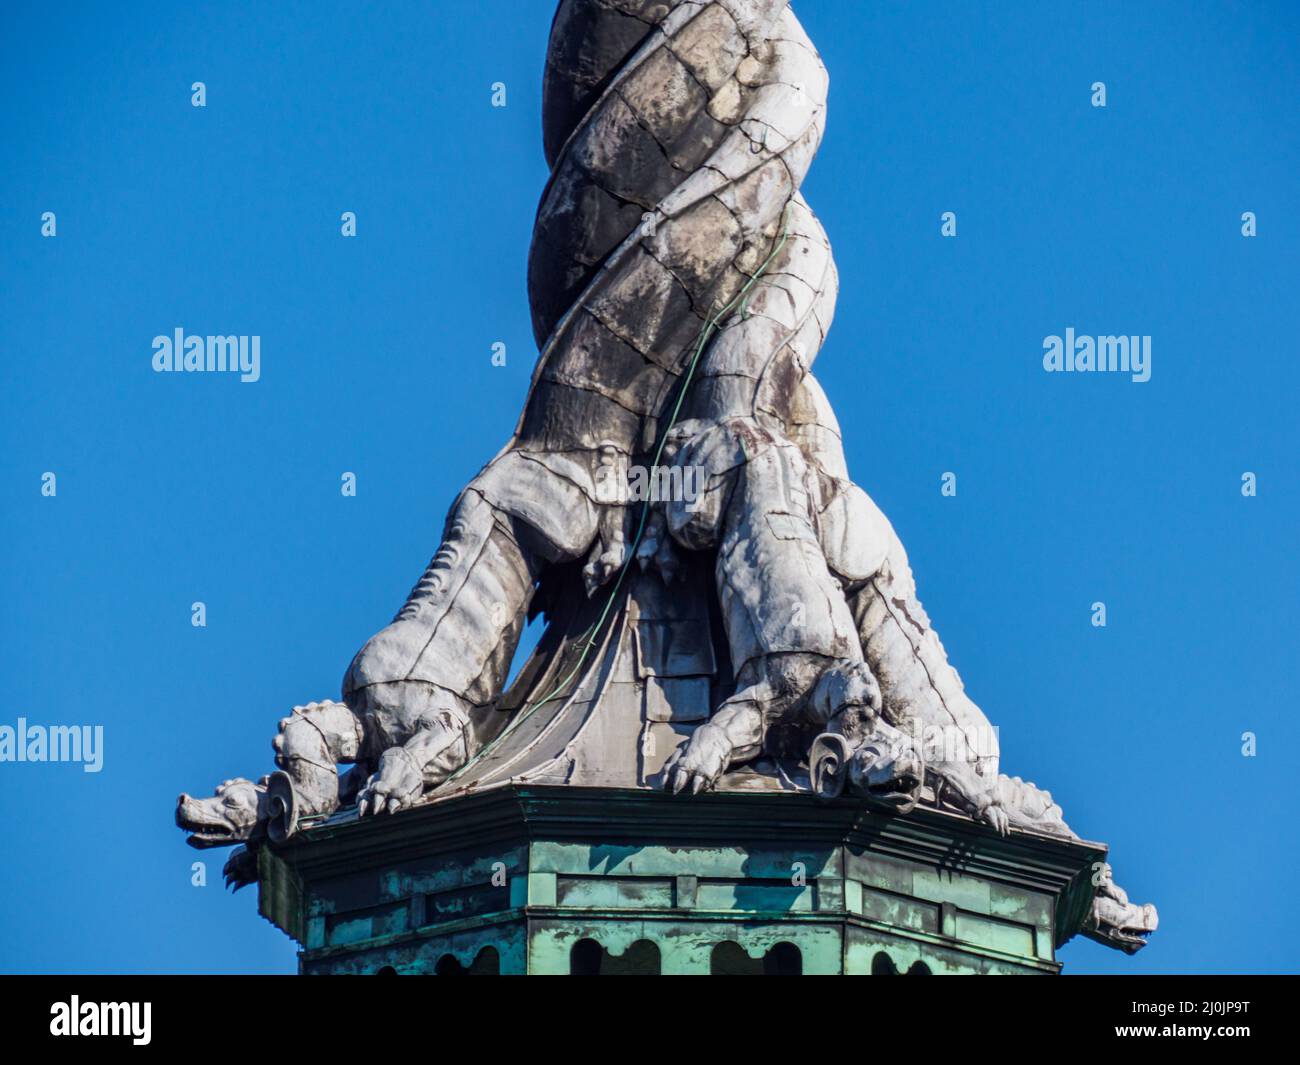 Copenhagen, Denmark - July, 2021: Spire, shaped as the tails of four dragons twined together, reaching a height of 56 metres on the Børsen -17th-centu Stock Photo